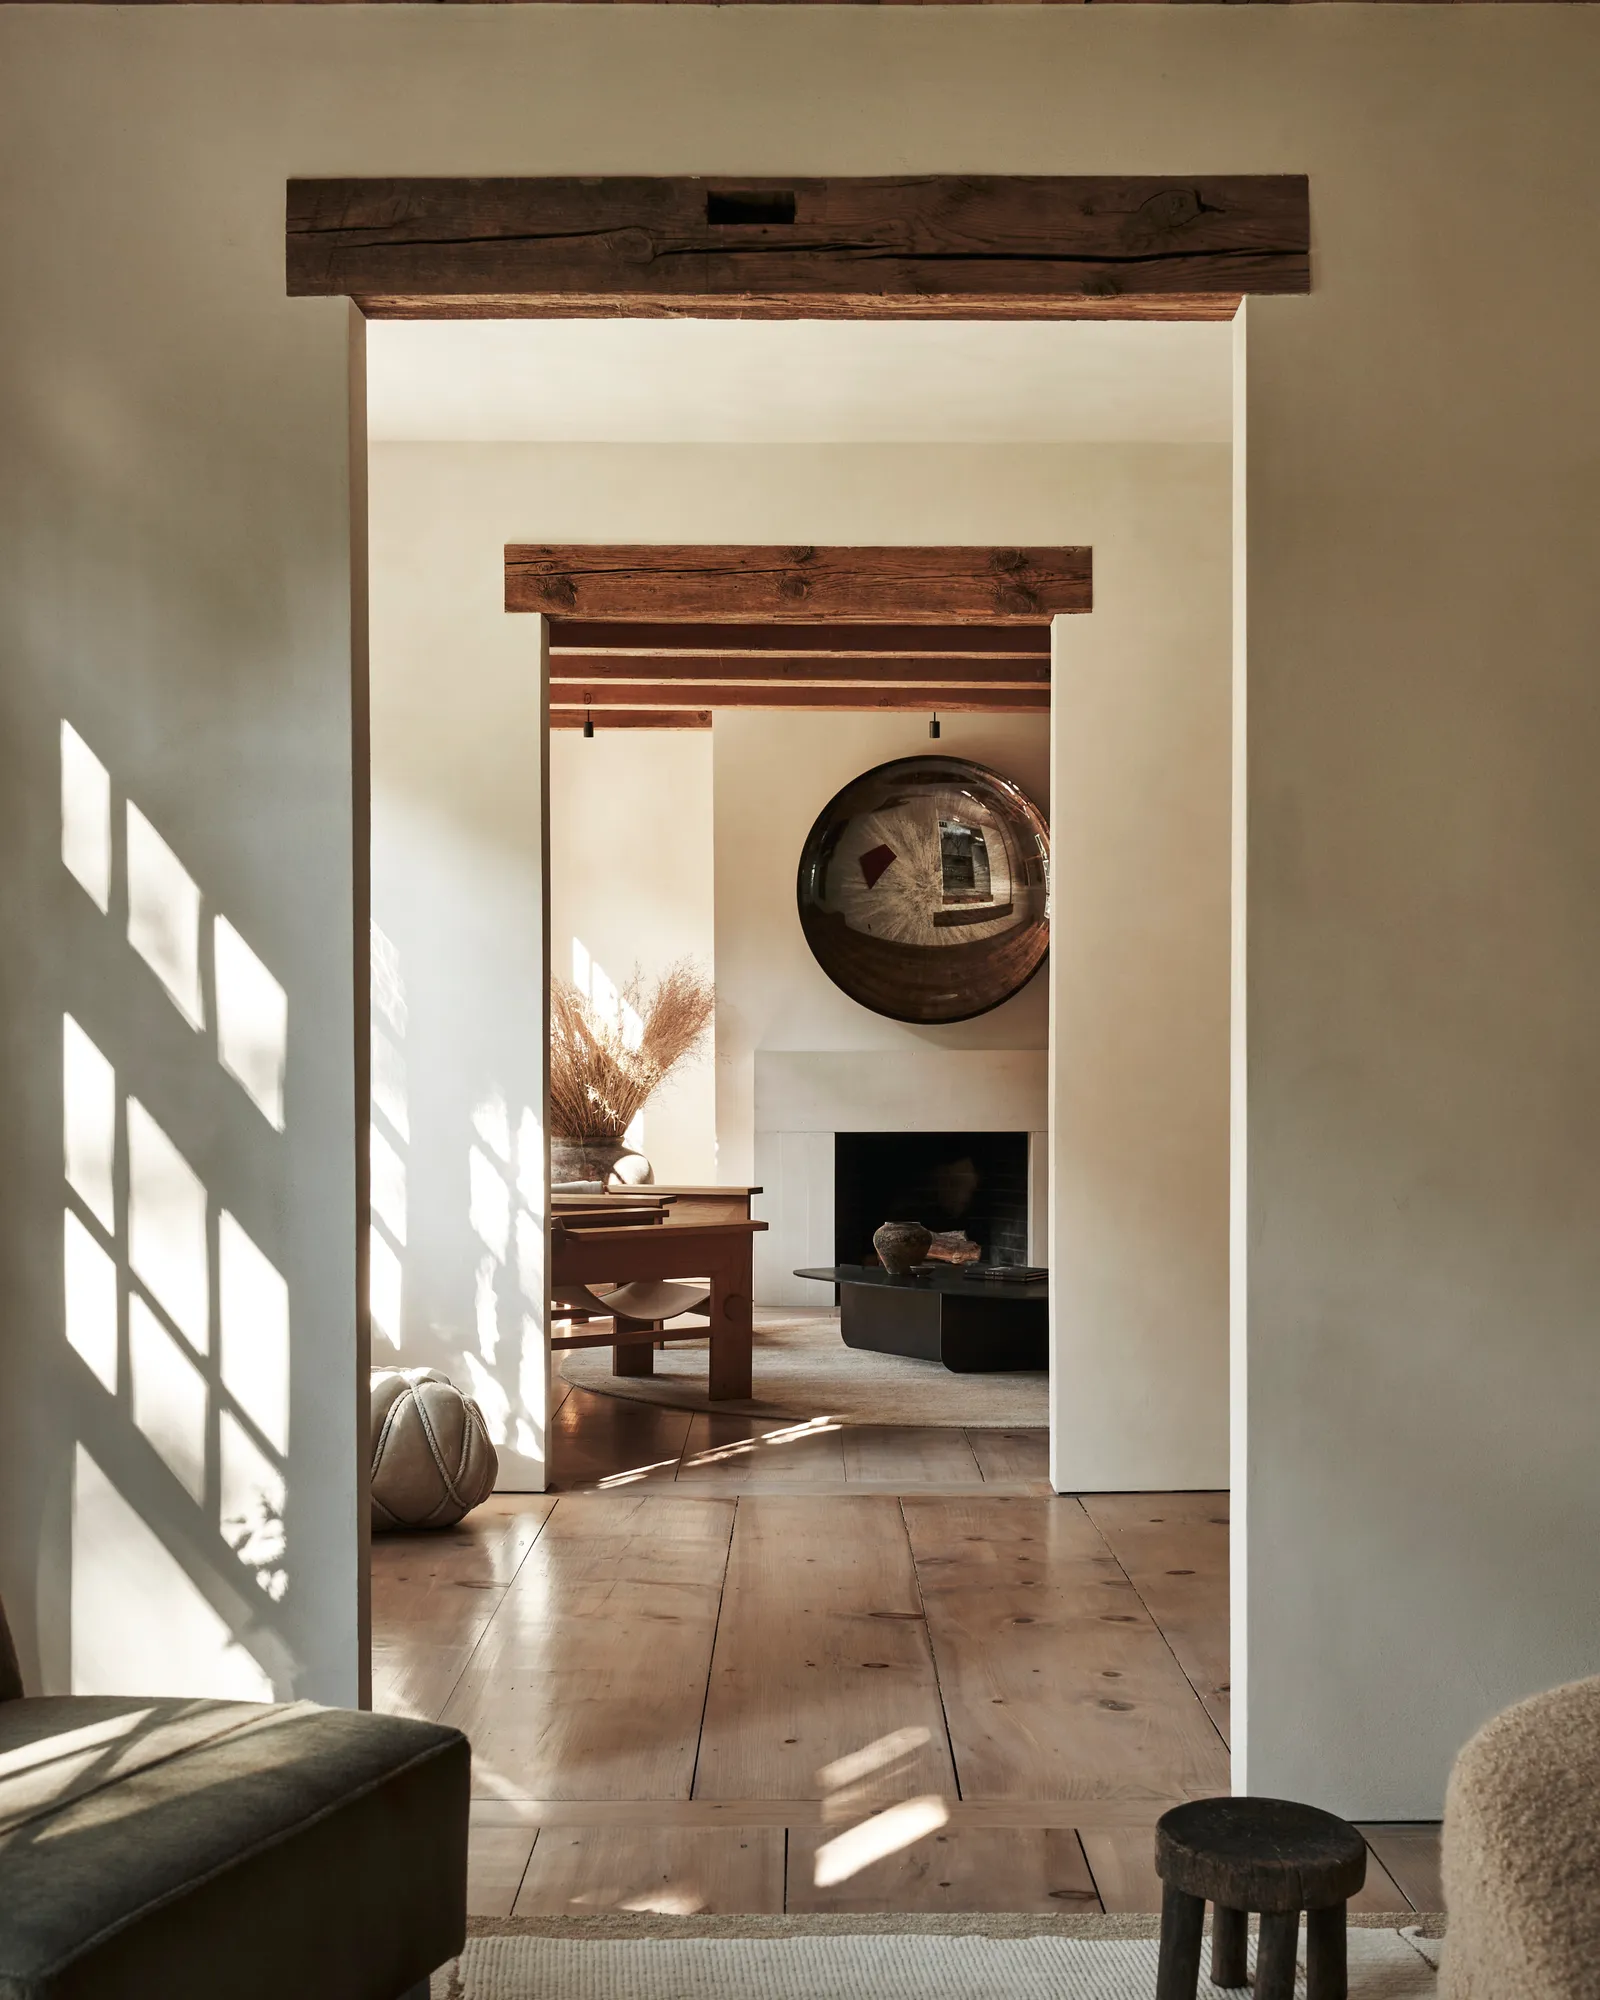 Entry with wooden floors and reclaimed beams